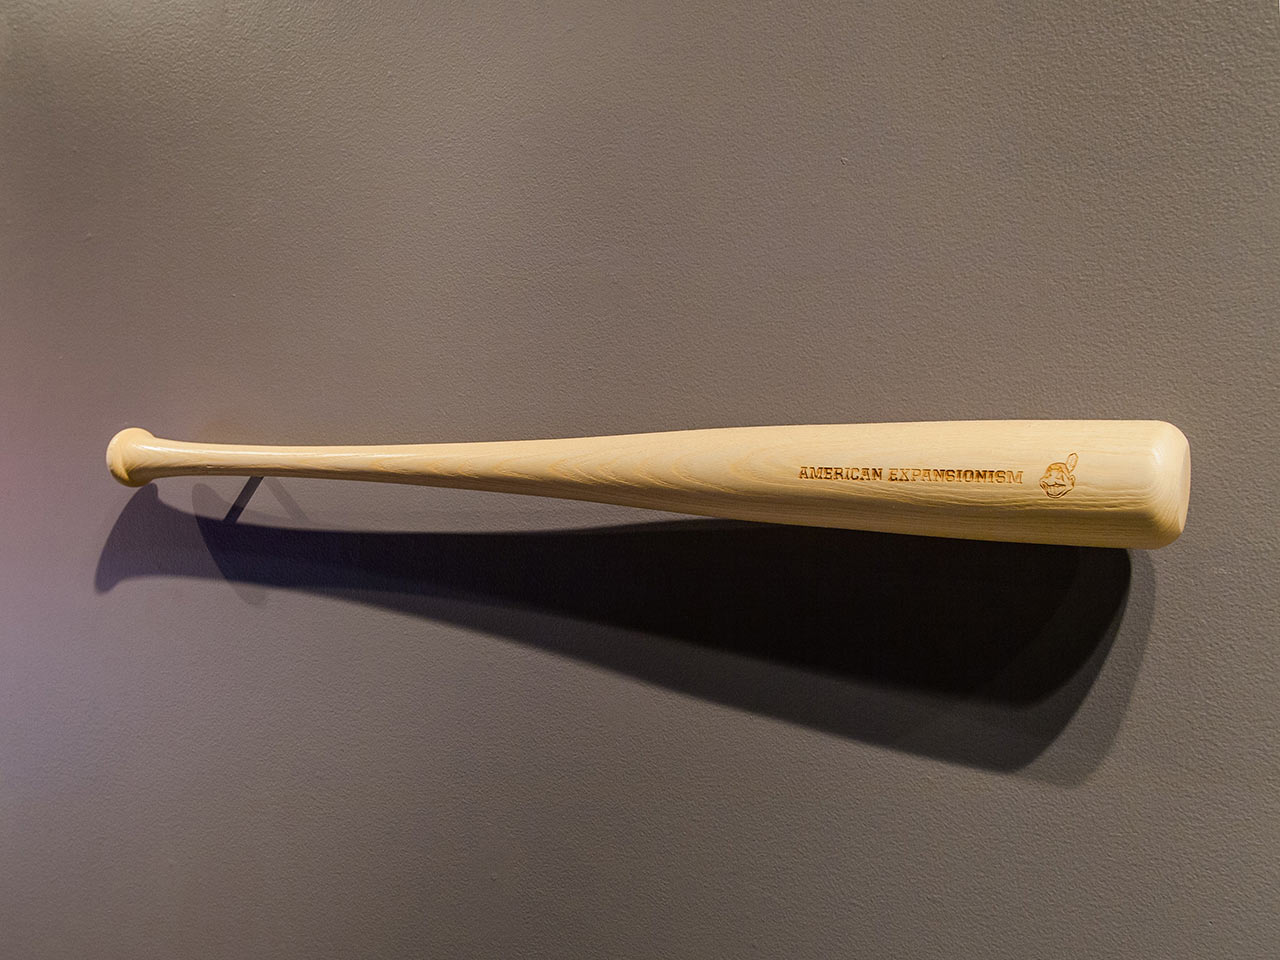 American Expansionism, 2012. An editioned baseball bat sculpture etched with the racist caricature Cleveland Indians logo and the words American Expansionism.